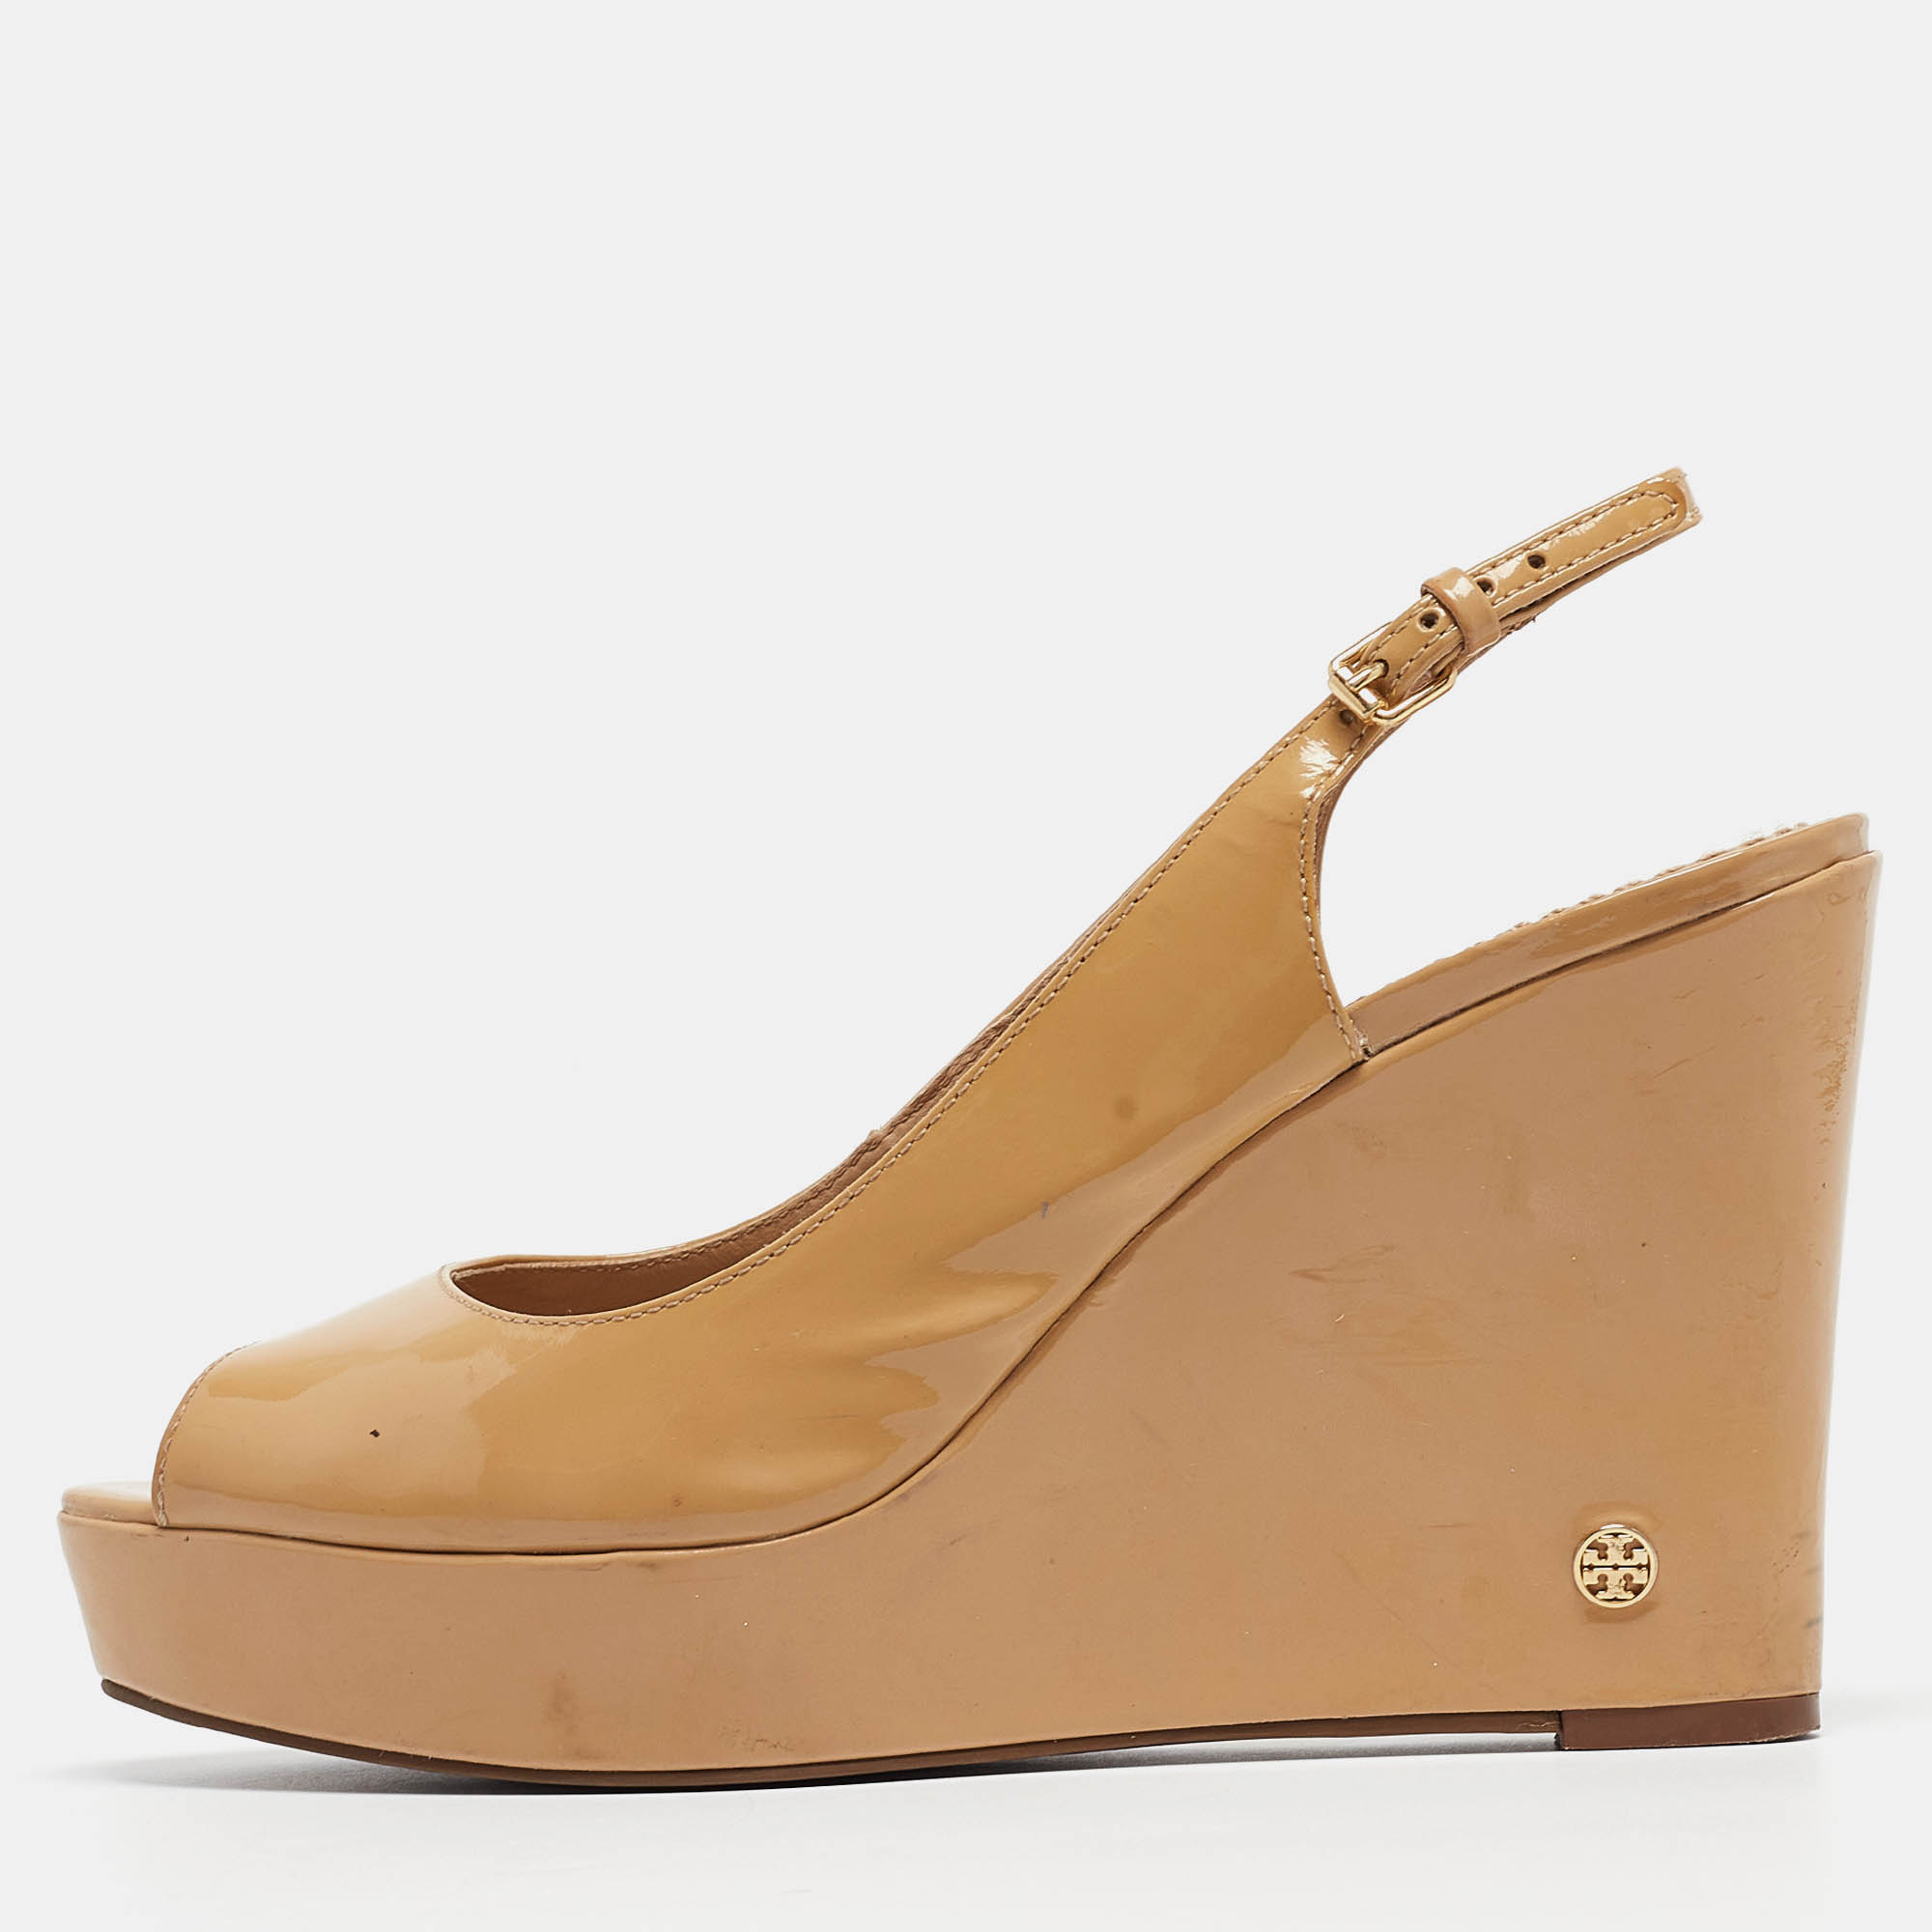 

Tory Burch Beige Patent Leather Slingback Wedge Sandals Size